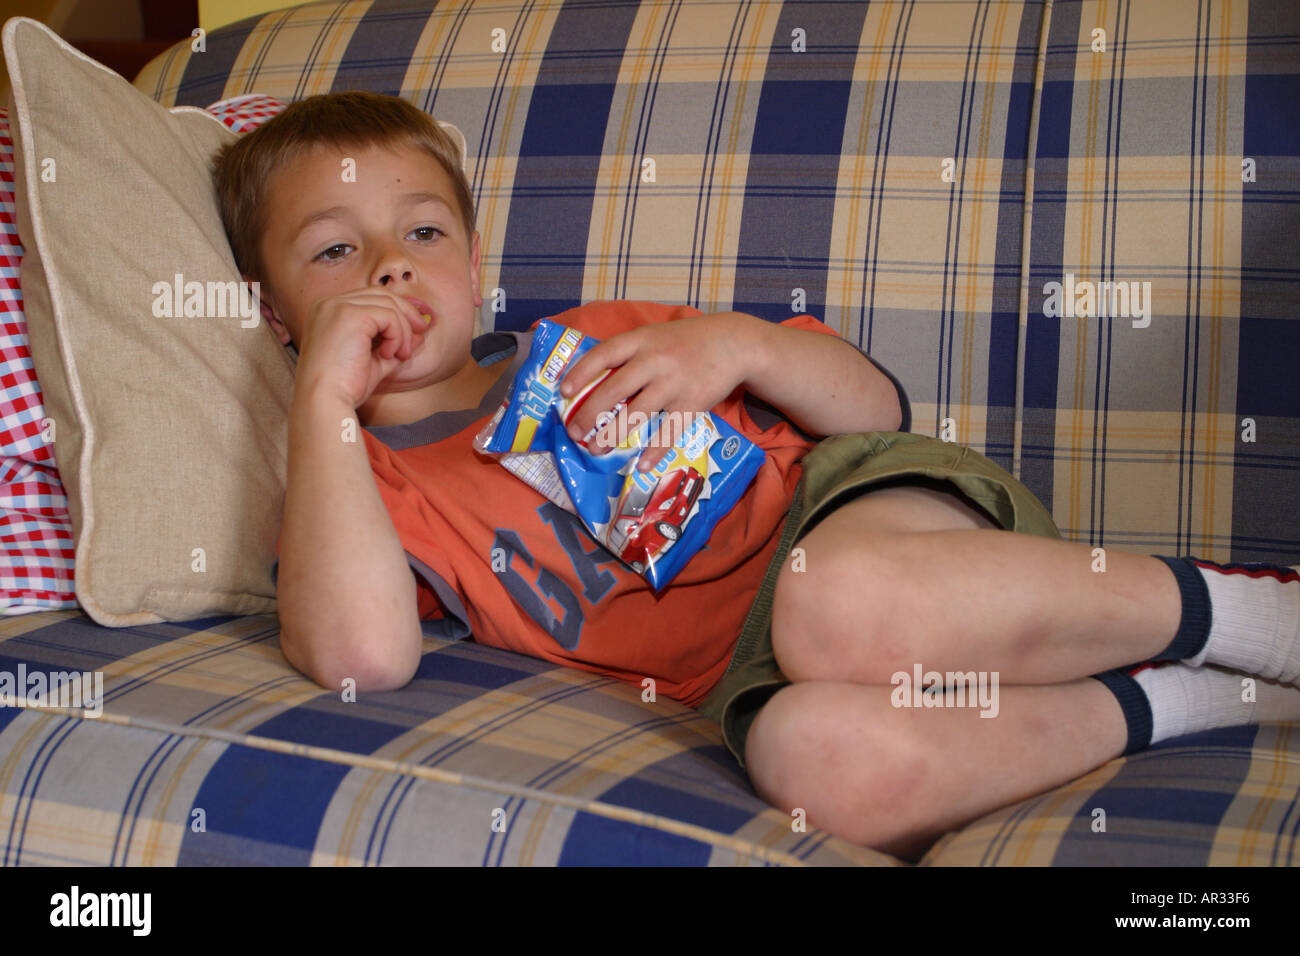 Young Boy under 10 lying on a sofa watching television TV and eating potato crisps Stock Photo